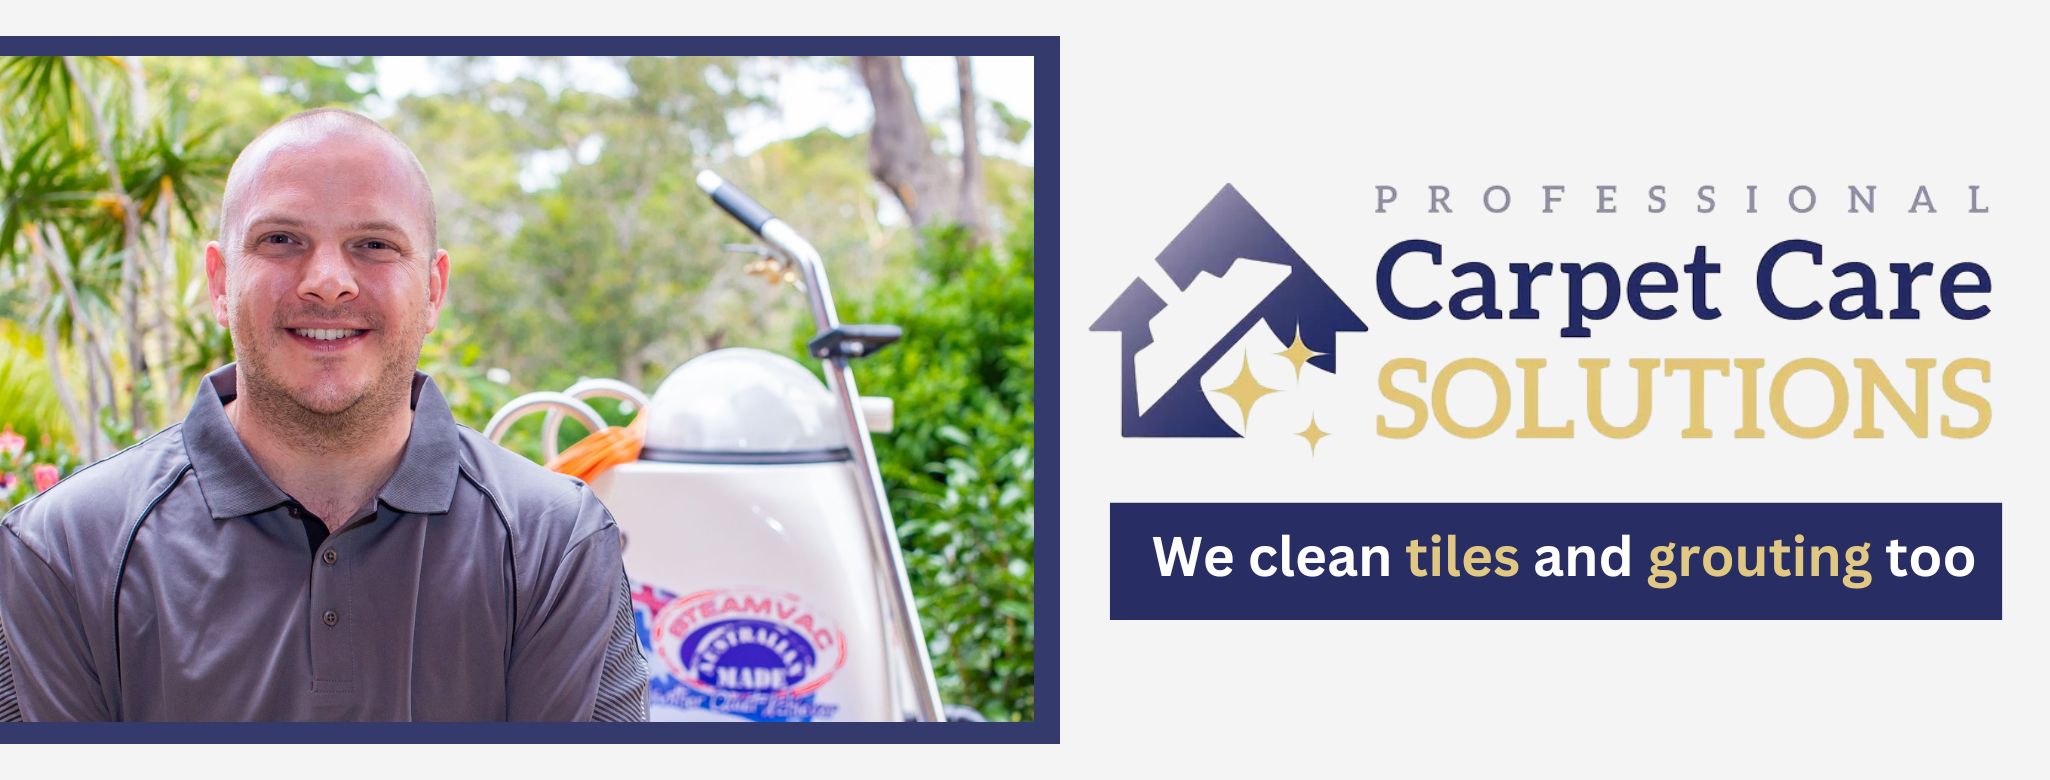 Keith Carpet Care - Professional Residential Deep Carpet Cleaning Services in Mesquite TX